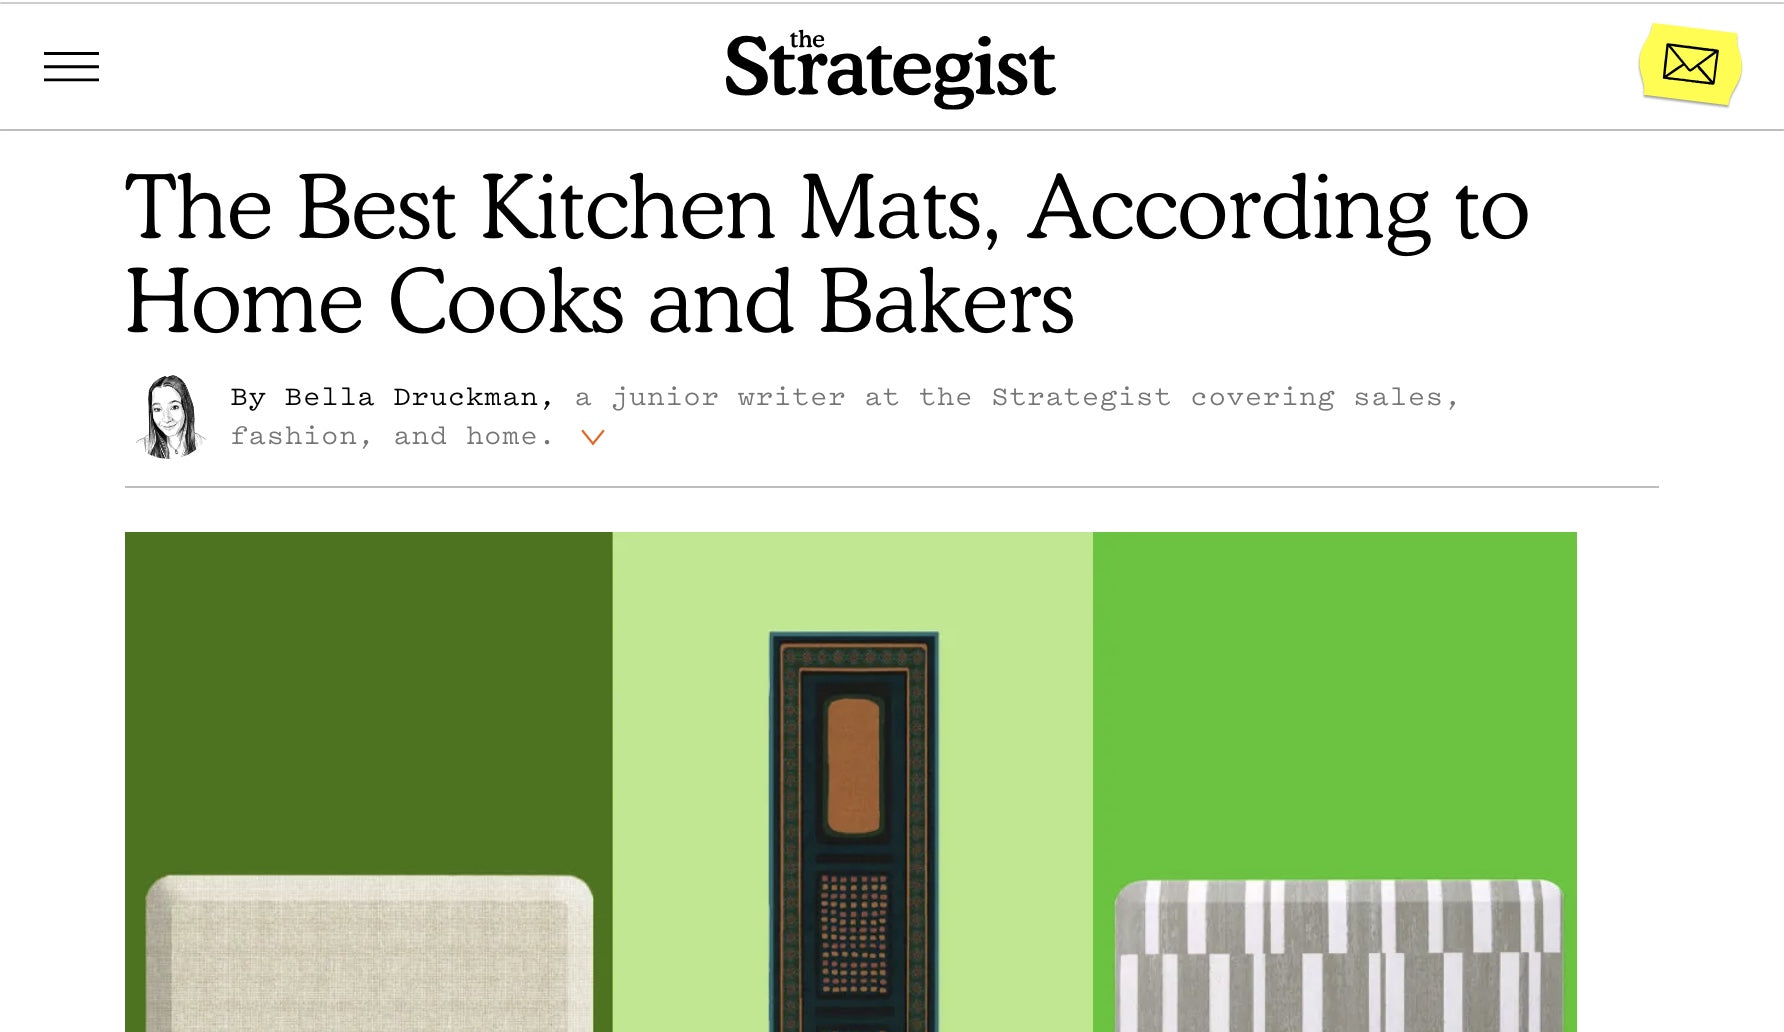 A screenshot of an article from The Strategist titled "The Best Kitchen Mats, According to Home Cooks and Bakers" featuring the House of Noa Nama Standing Mat in Basil